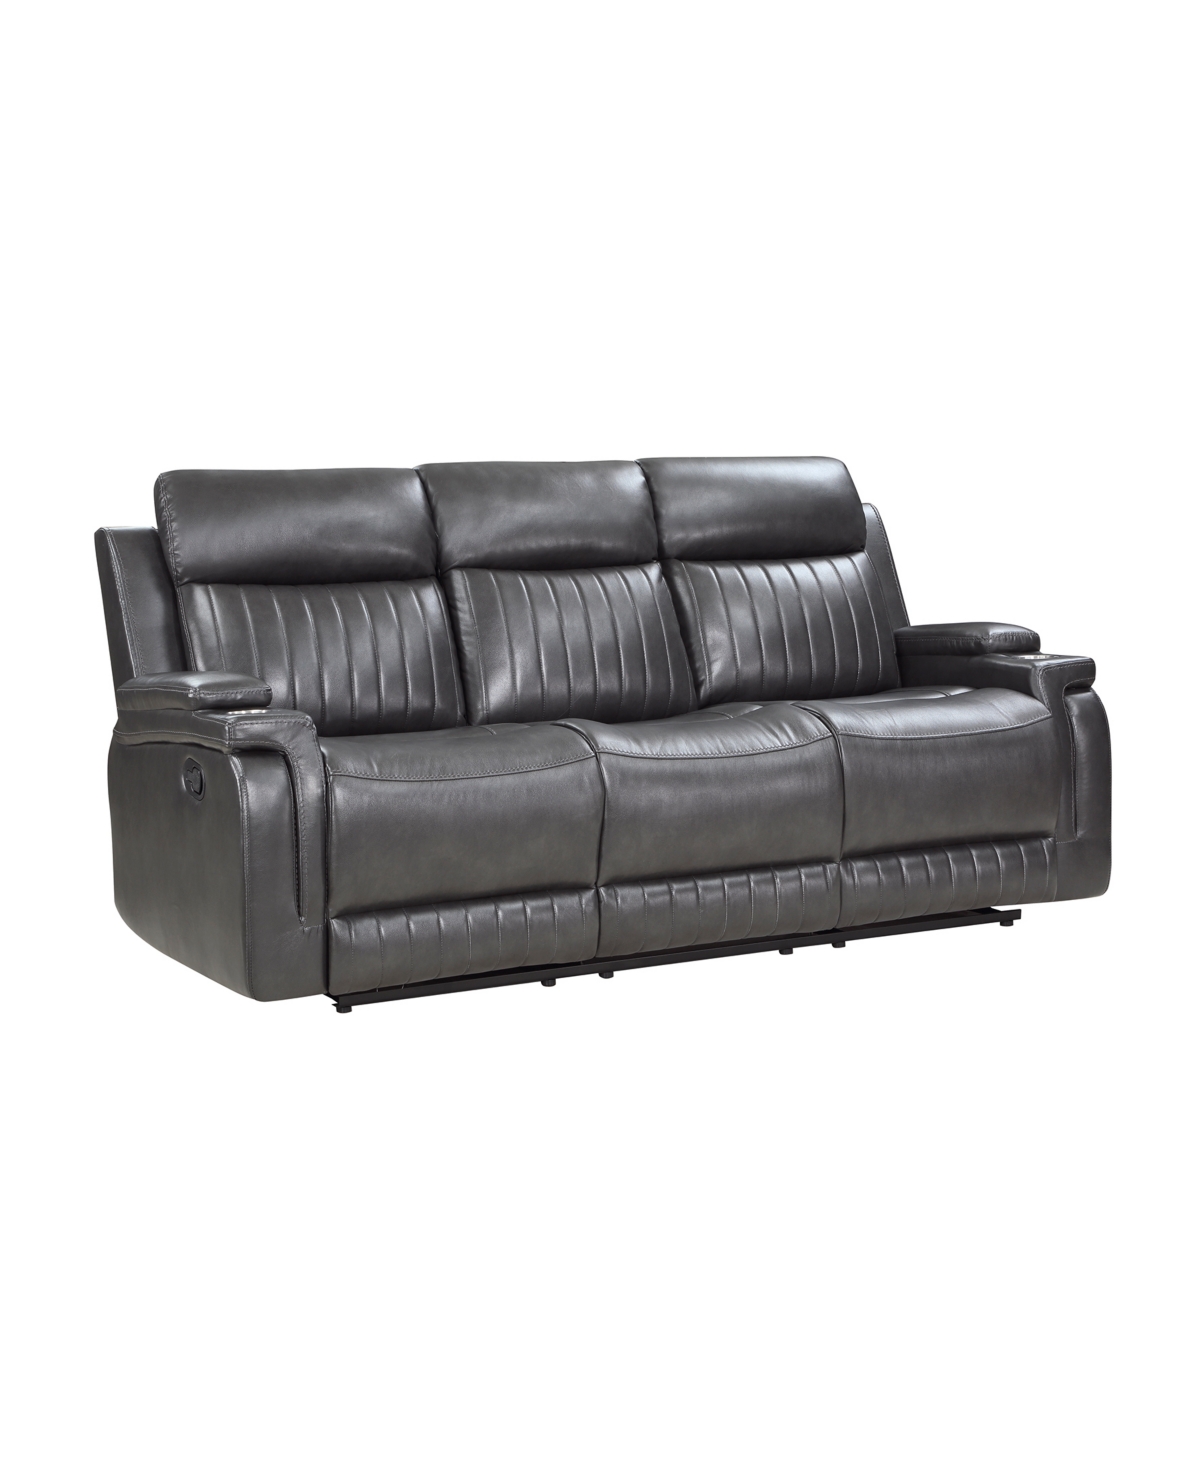 Homelegance White Label Wallstone 82" Double Reclining Sofa With Drop-down Cup Holder In Gray